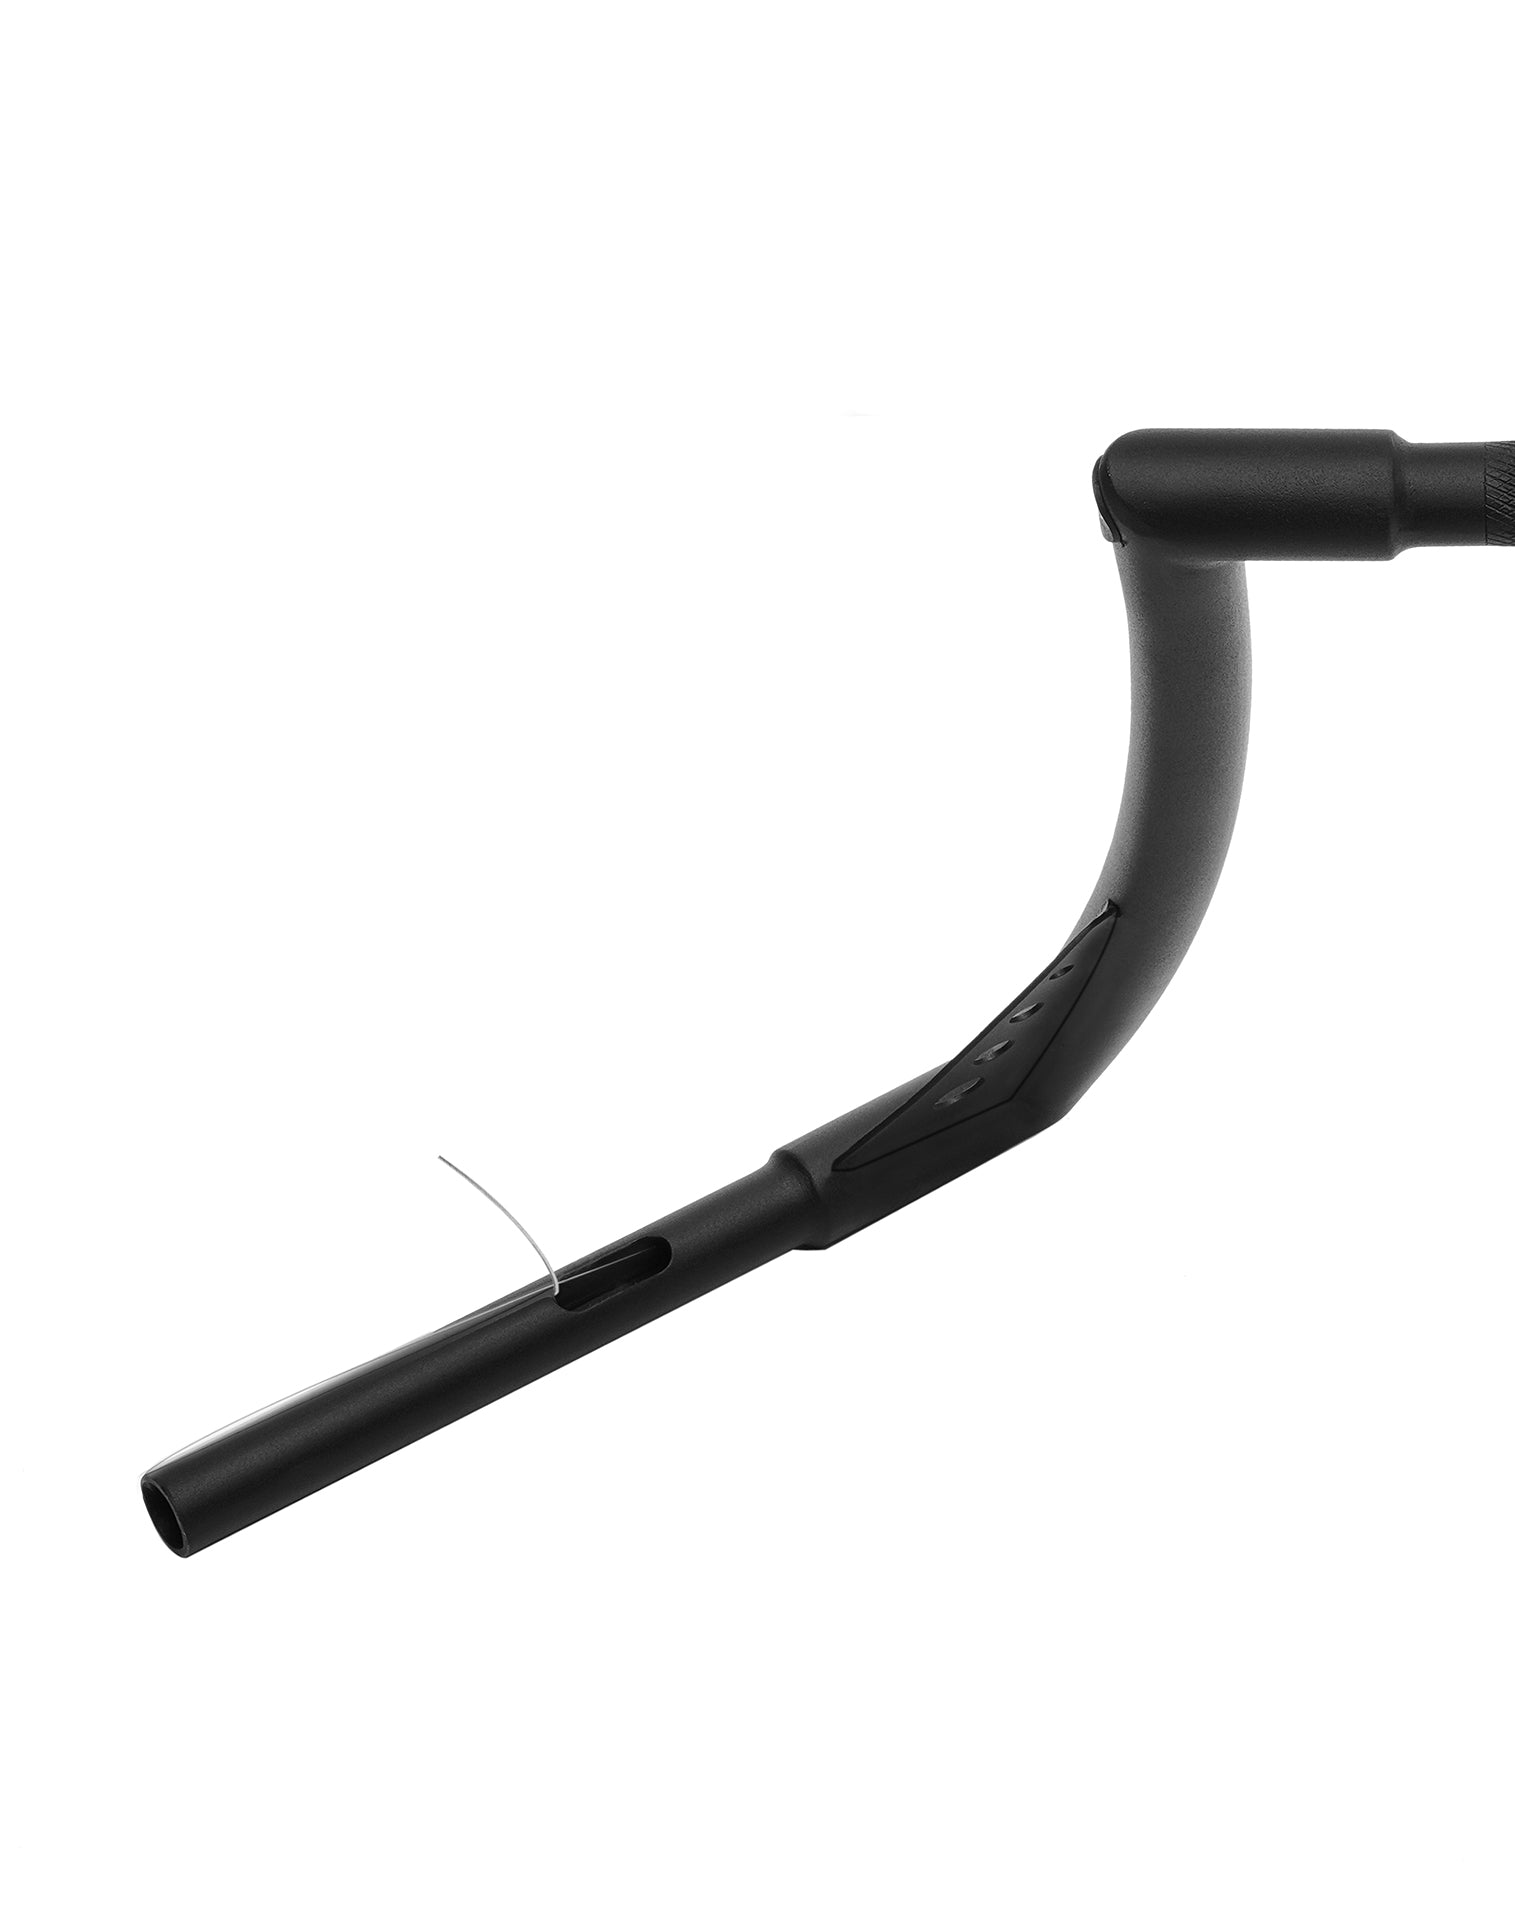 Viking Iron Born 12" Handlebar for Harley Sportster 1200 Low XL1200L Matte Black Close up View